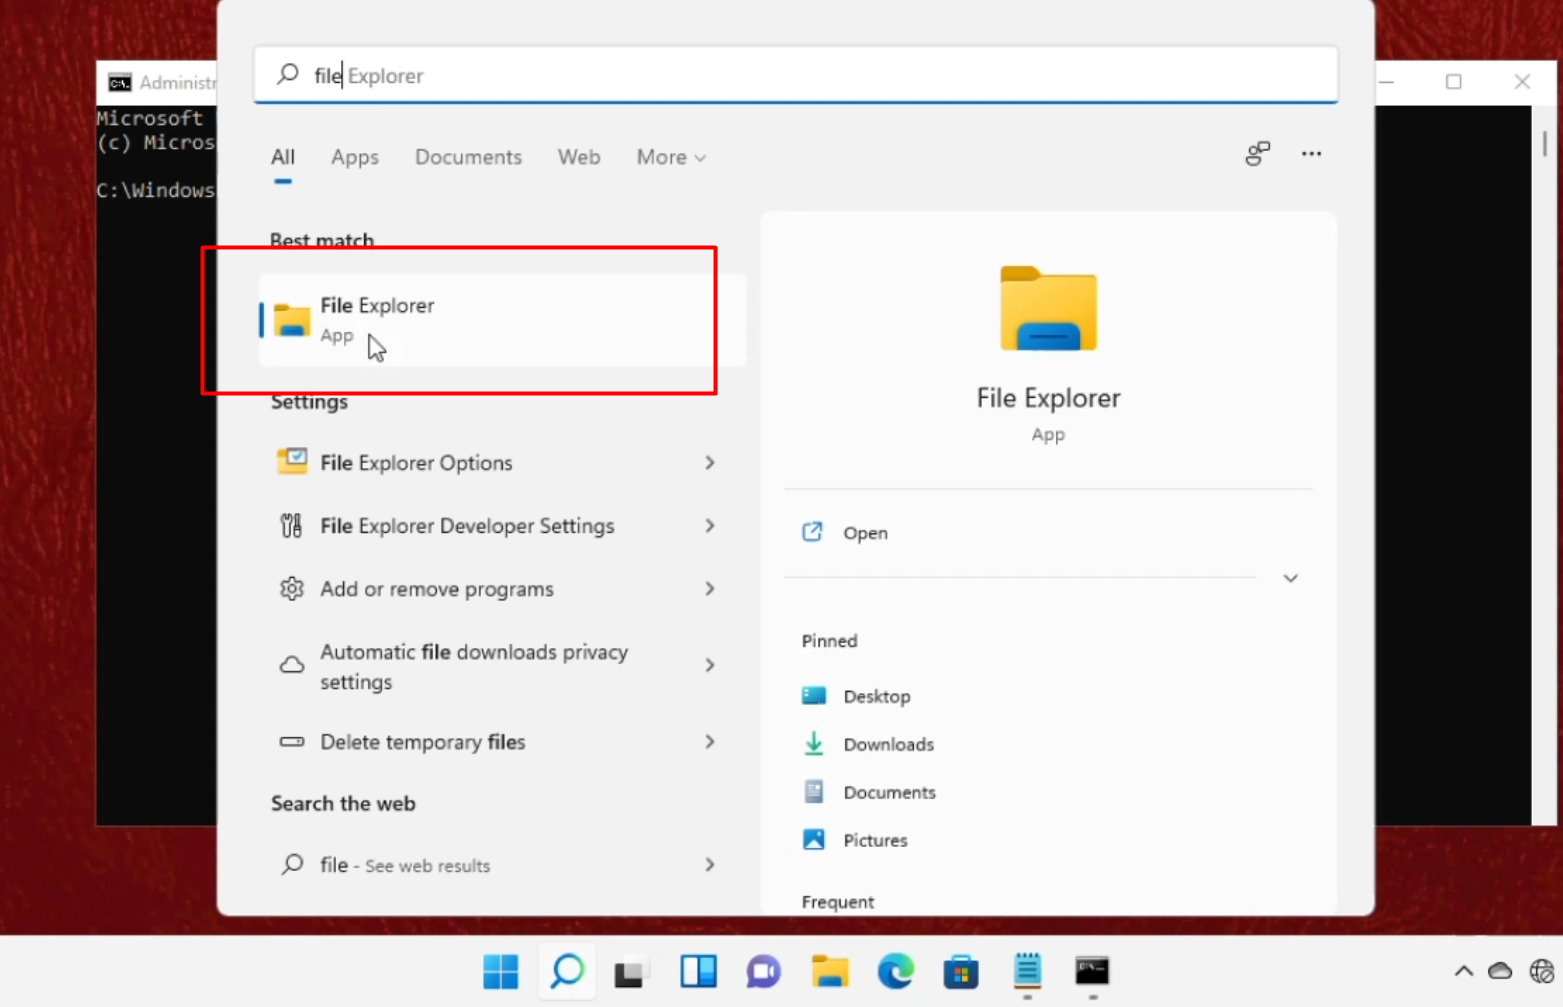 Open File Explorer from Search Bar